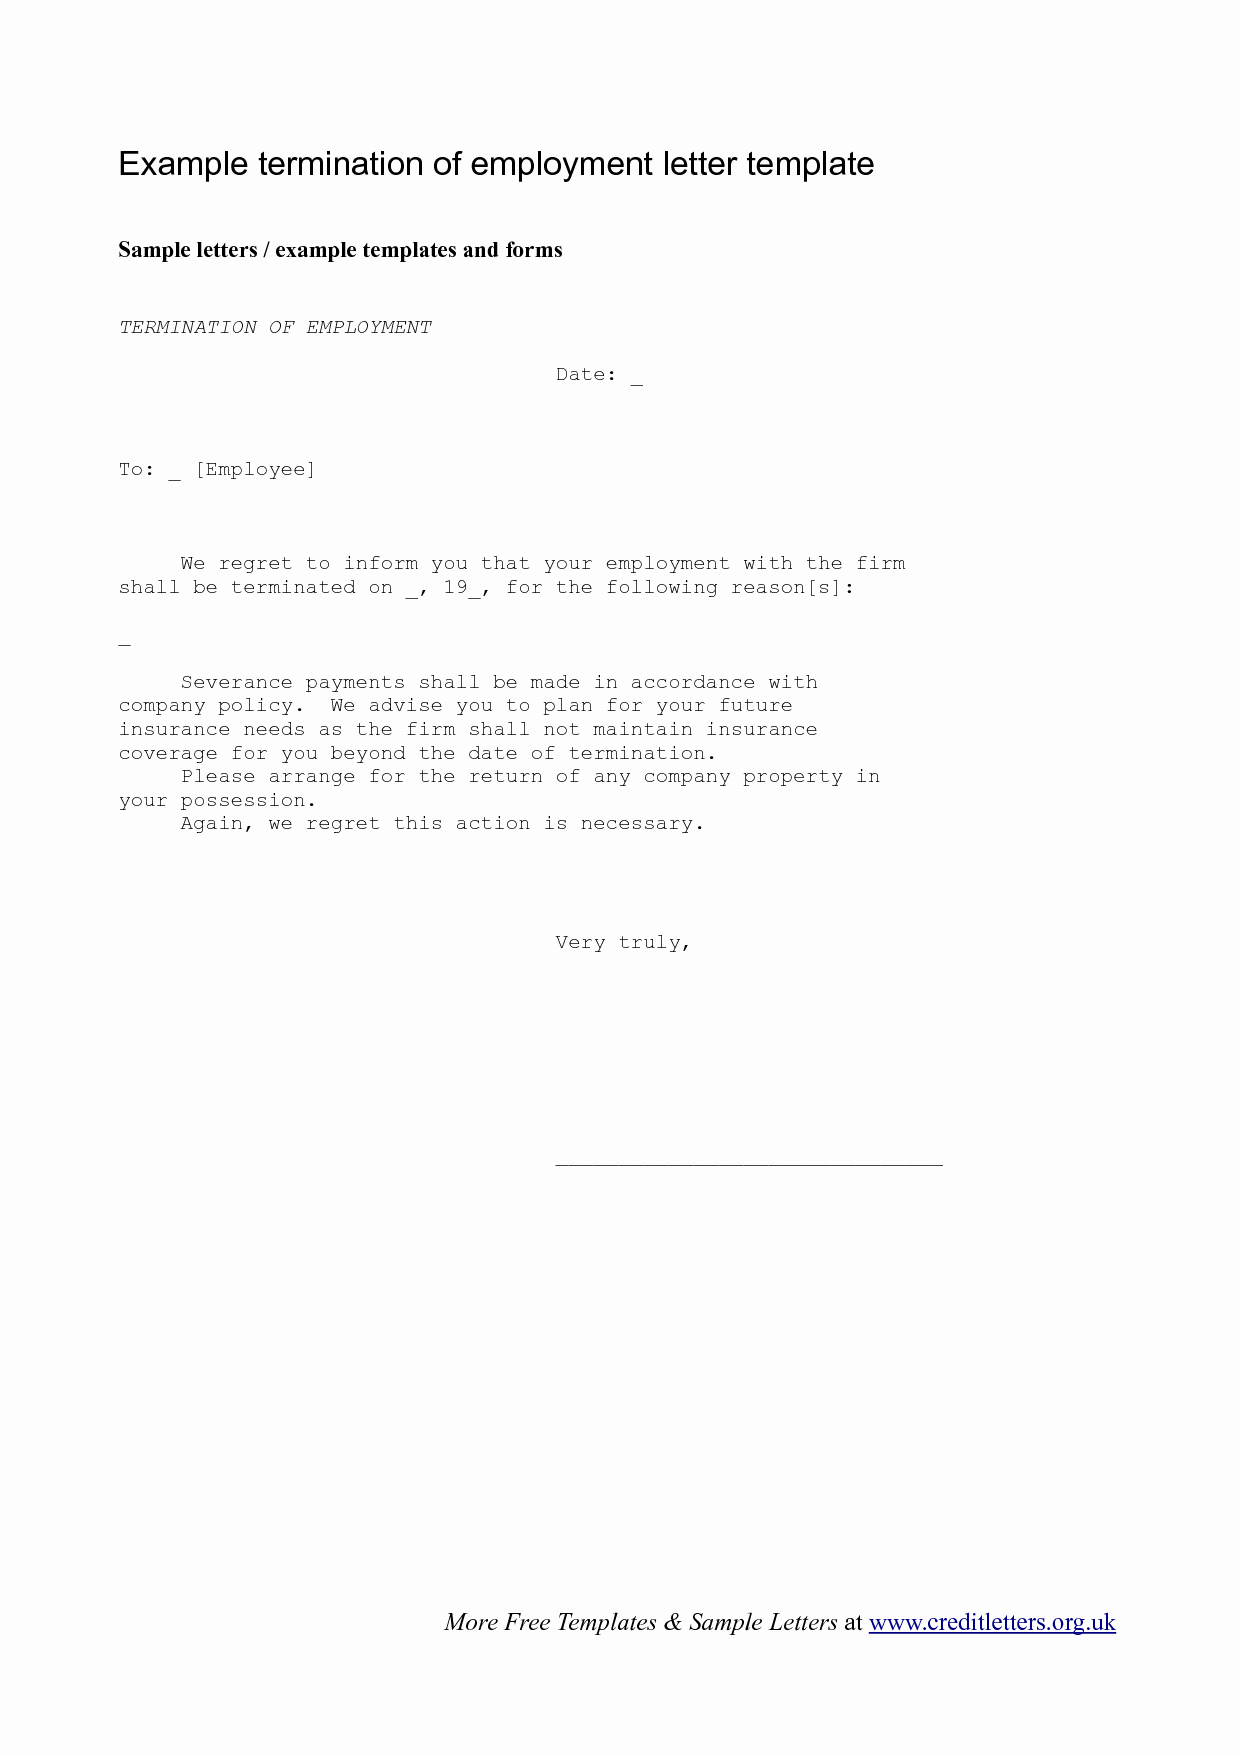 Sample Letter Of Employement Awesome Employee Termination Letter the Employee Termination